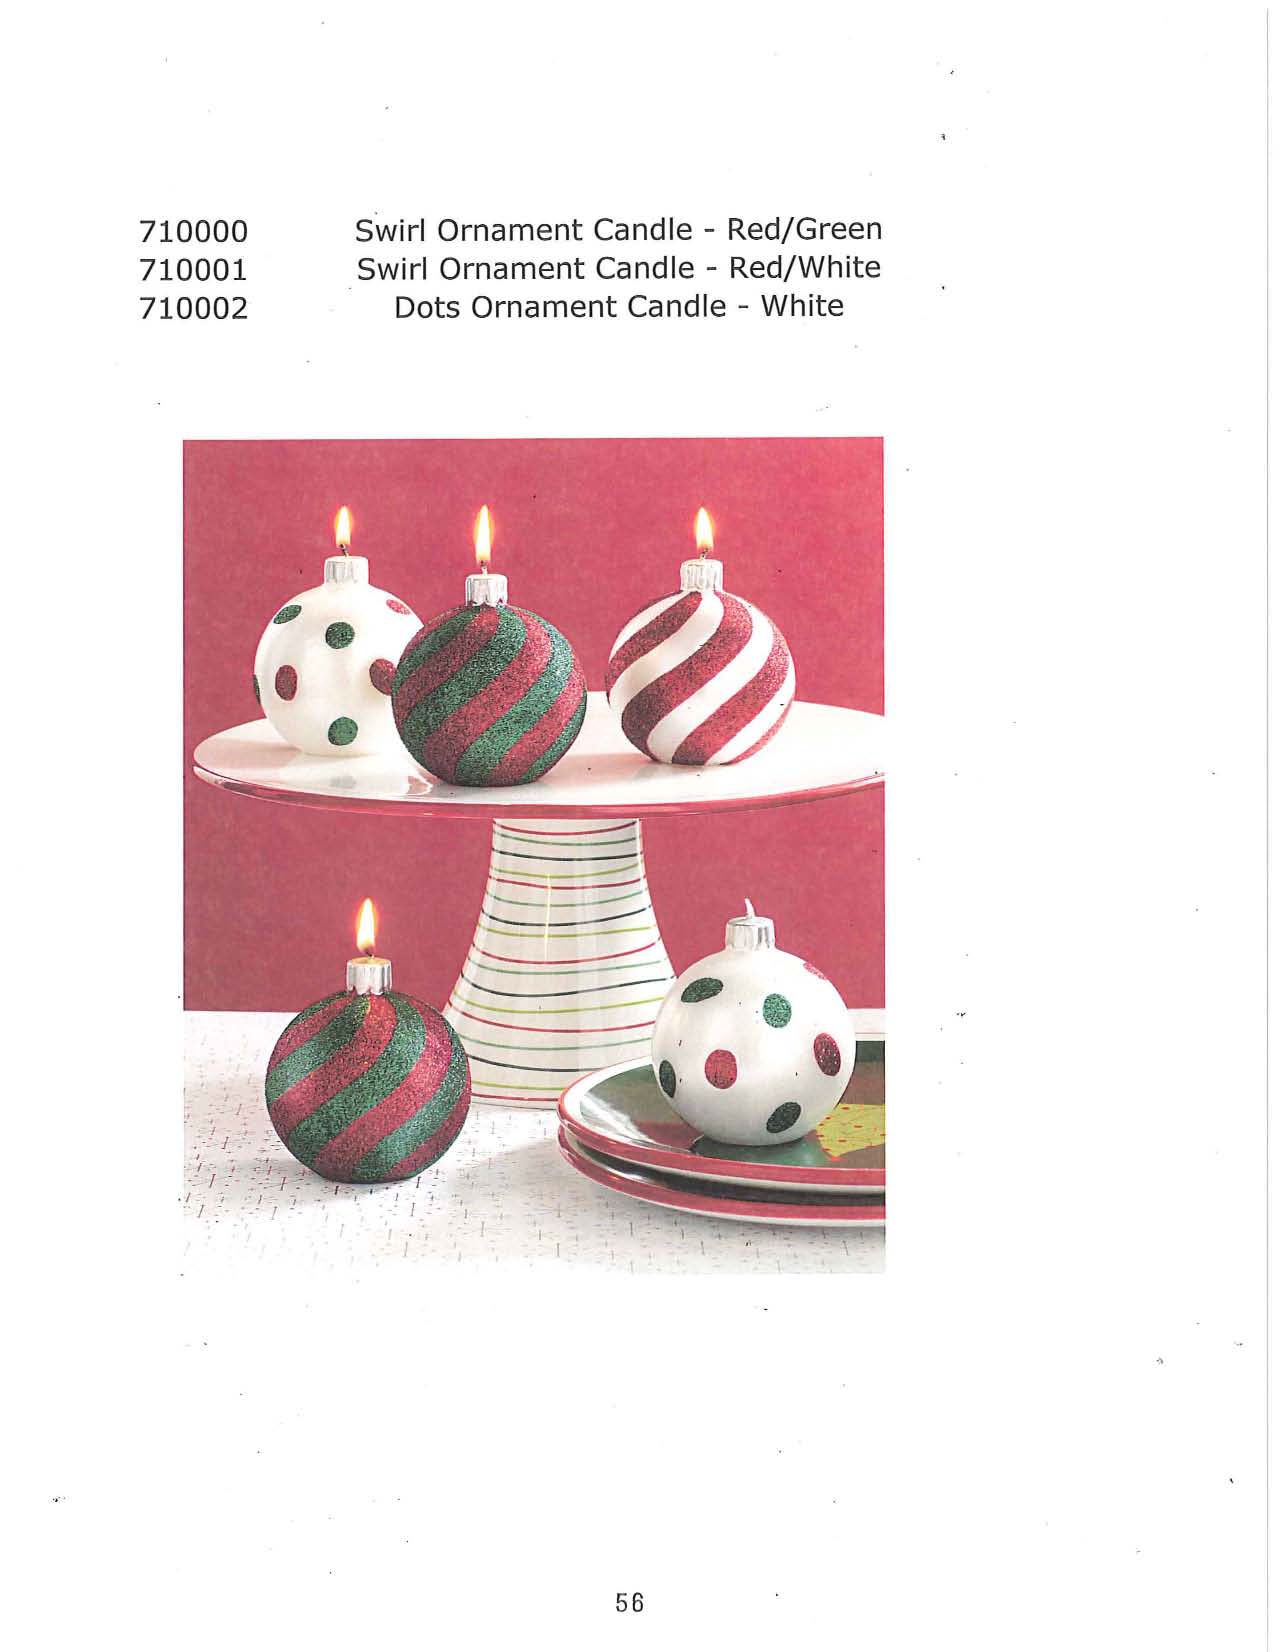 Swirl Ornament Candle - Red/Green and Red/White; Dots Ornament Candle - White